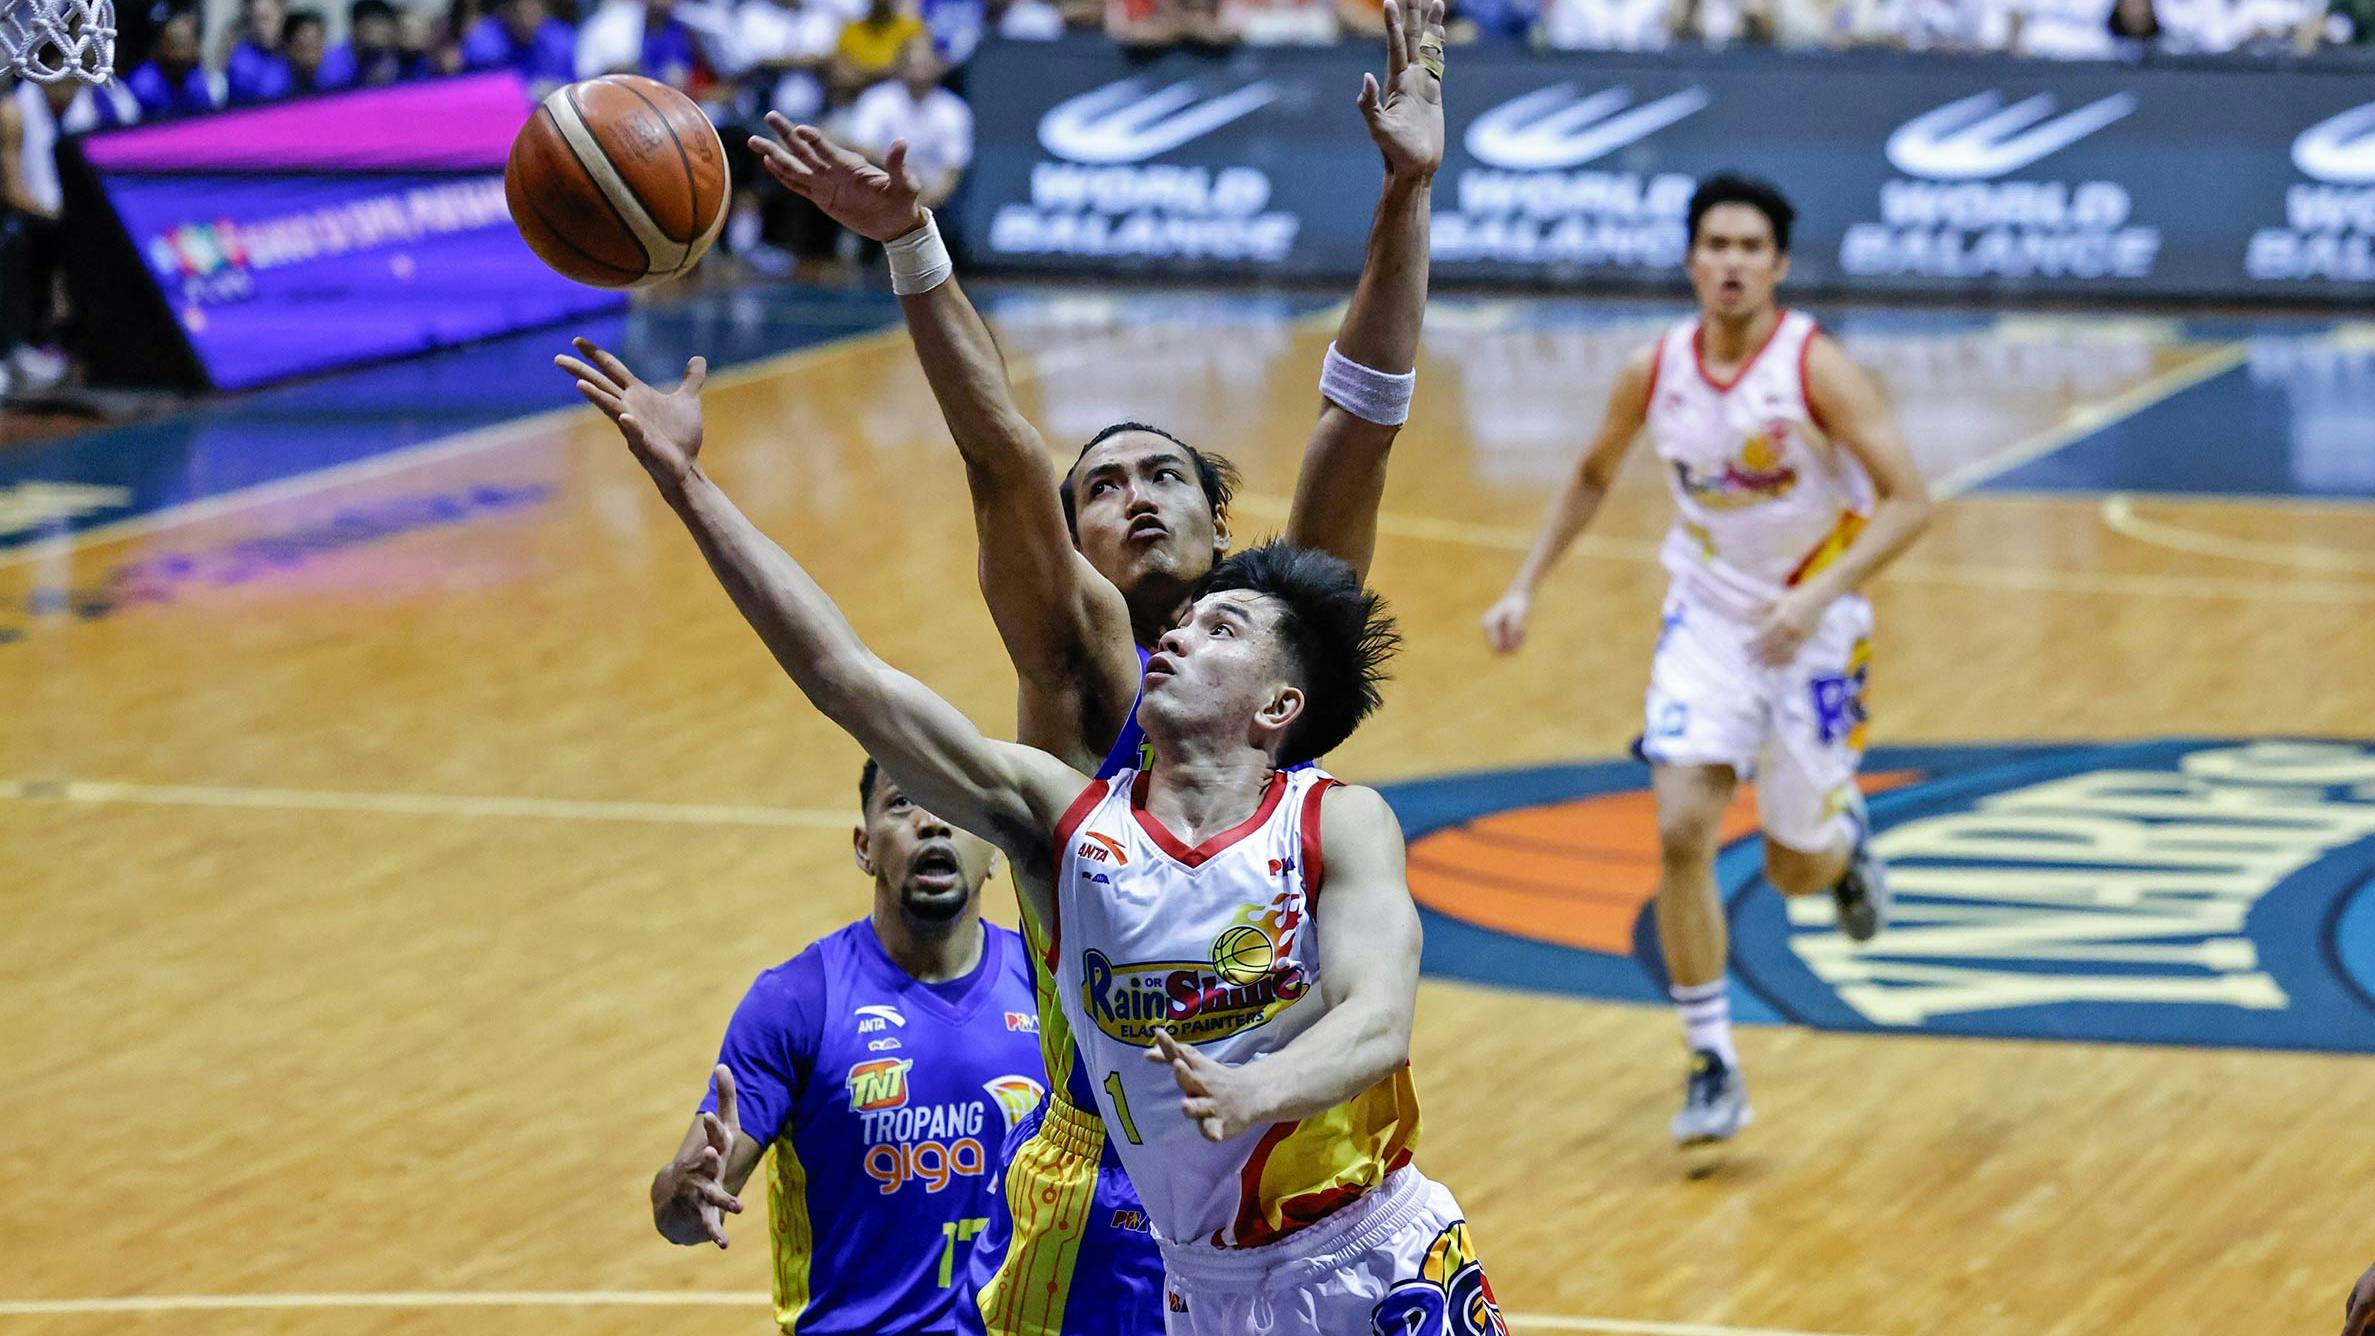 PBA: Returning Chot Reyes admits TNT ‘dodged a bullet’ after Adrian Nocum sat out final minutes in Tropang Giga win